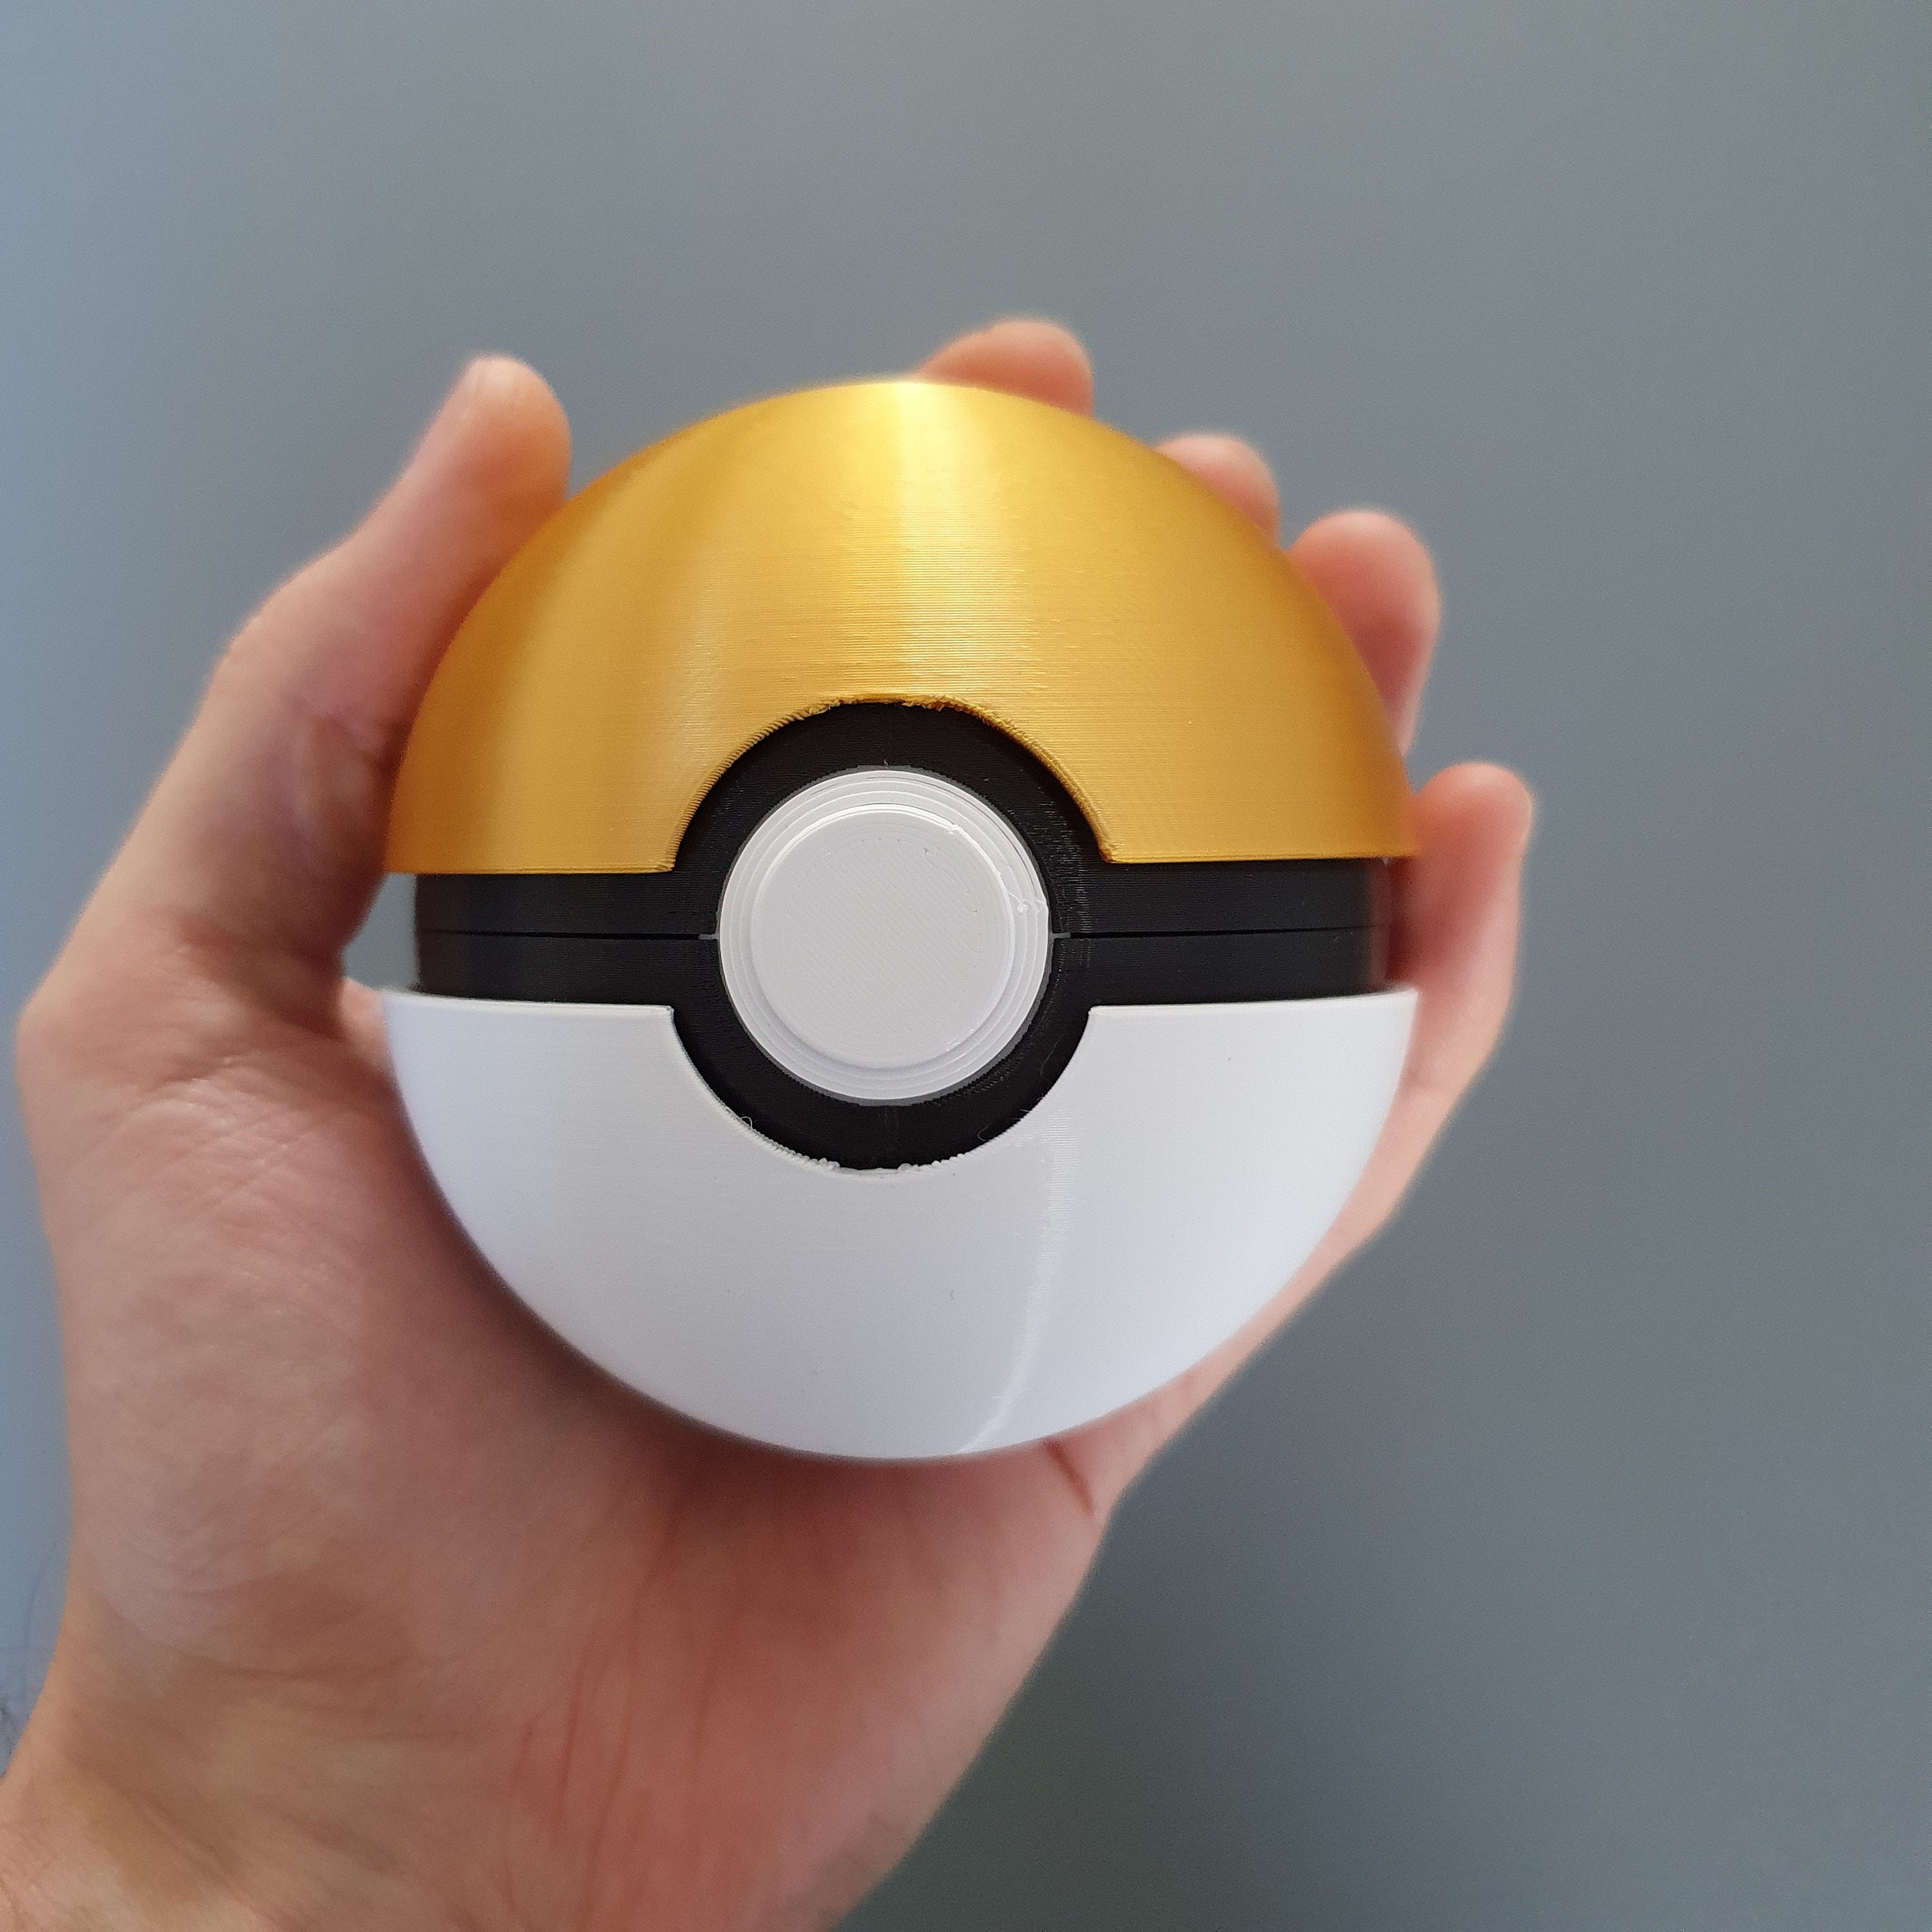 Gs Pokeball Replica Functioning Button Release Lid Etsy Australia